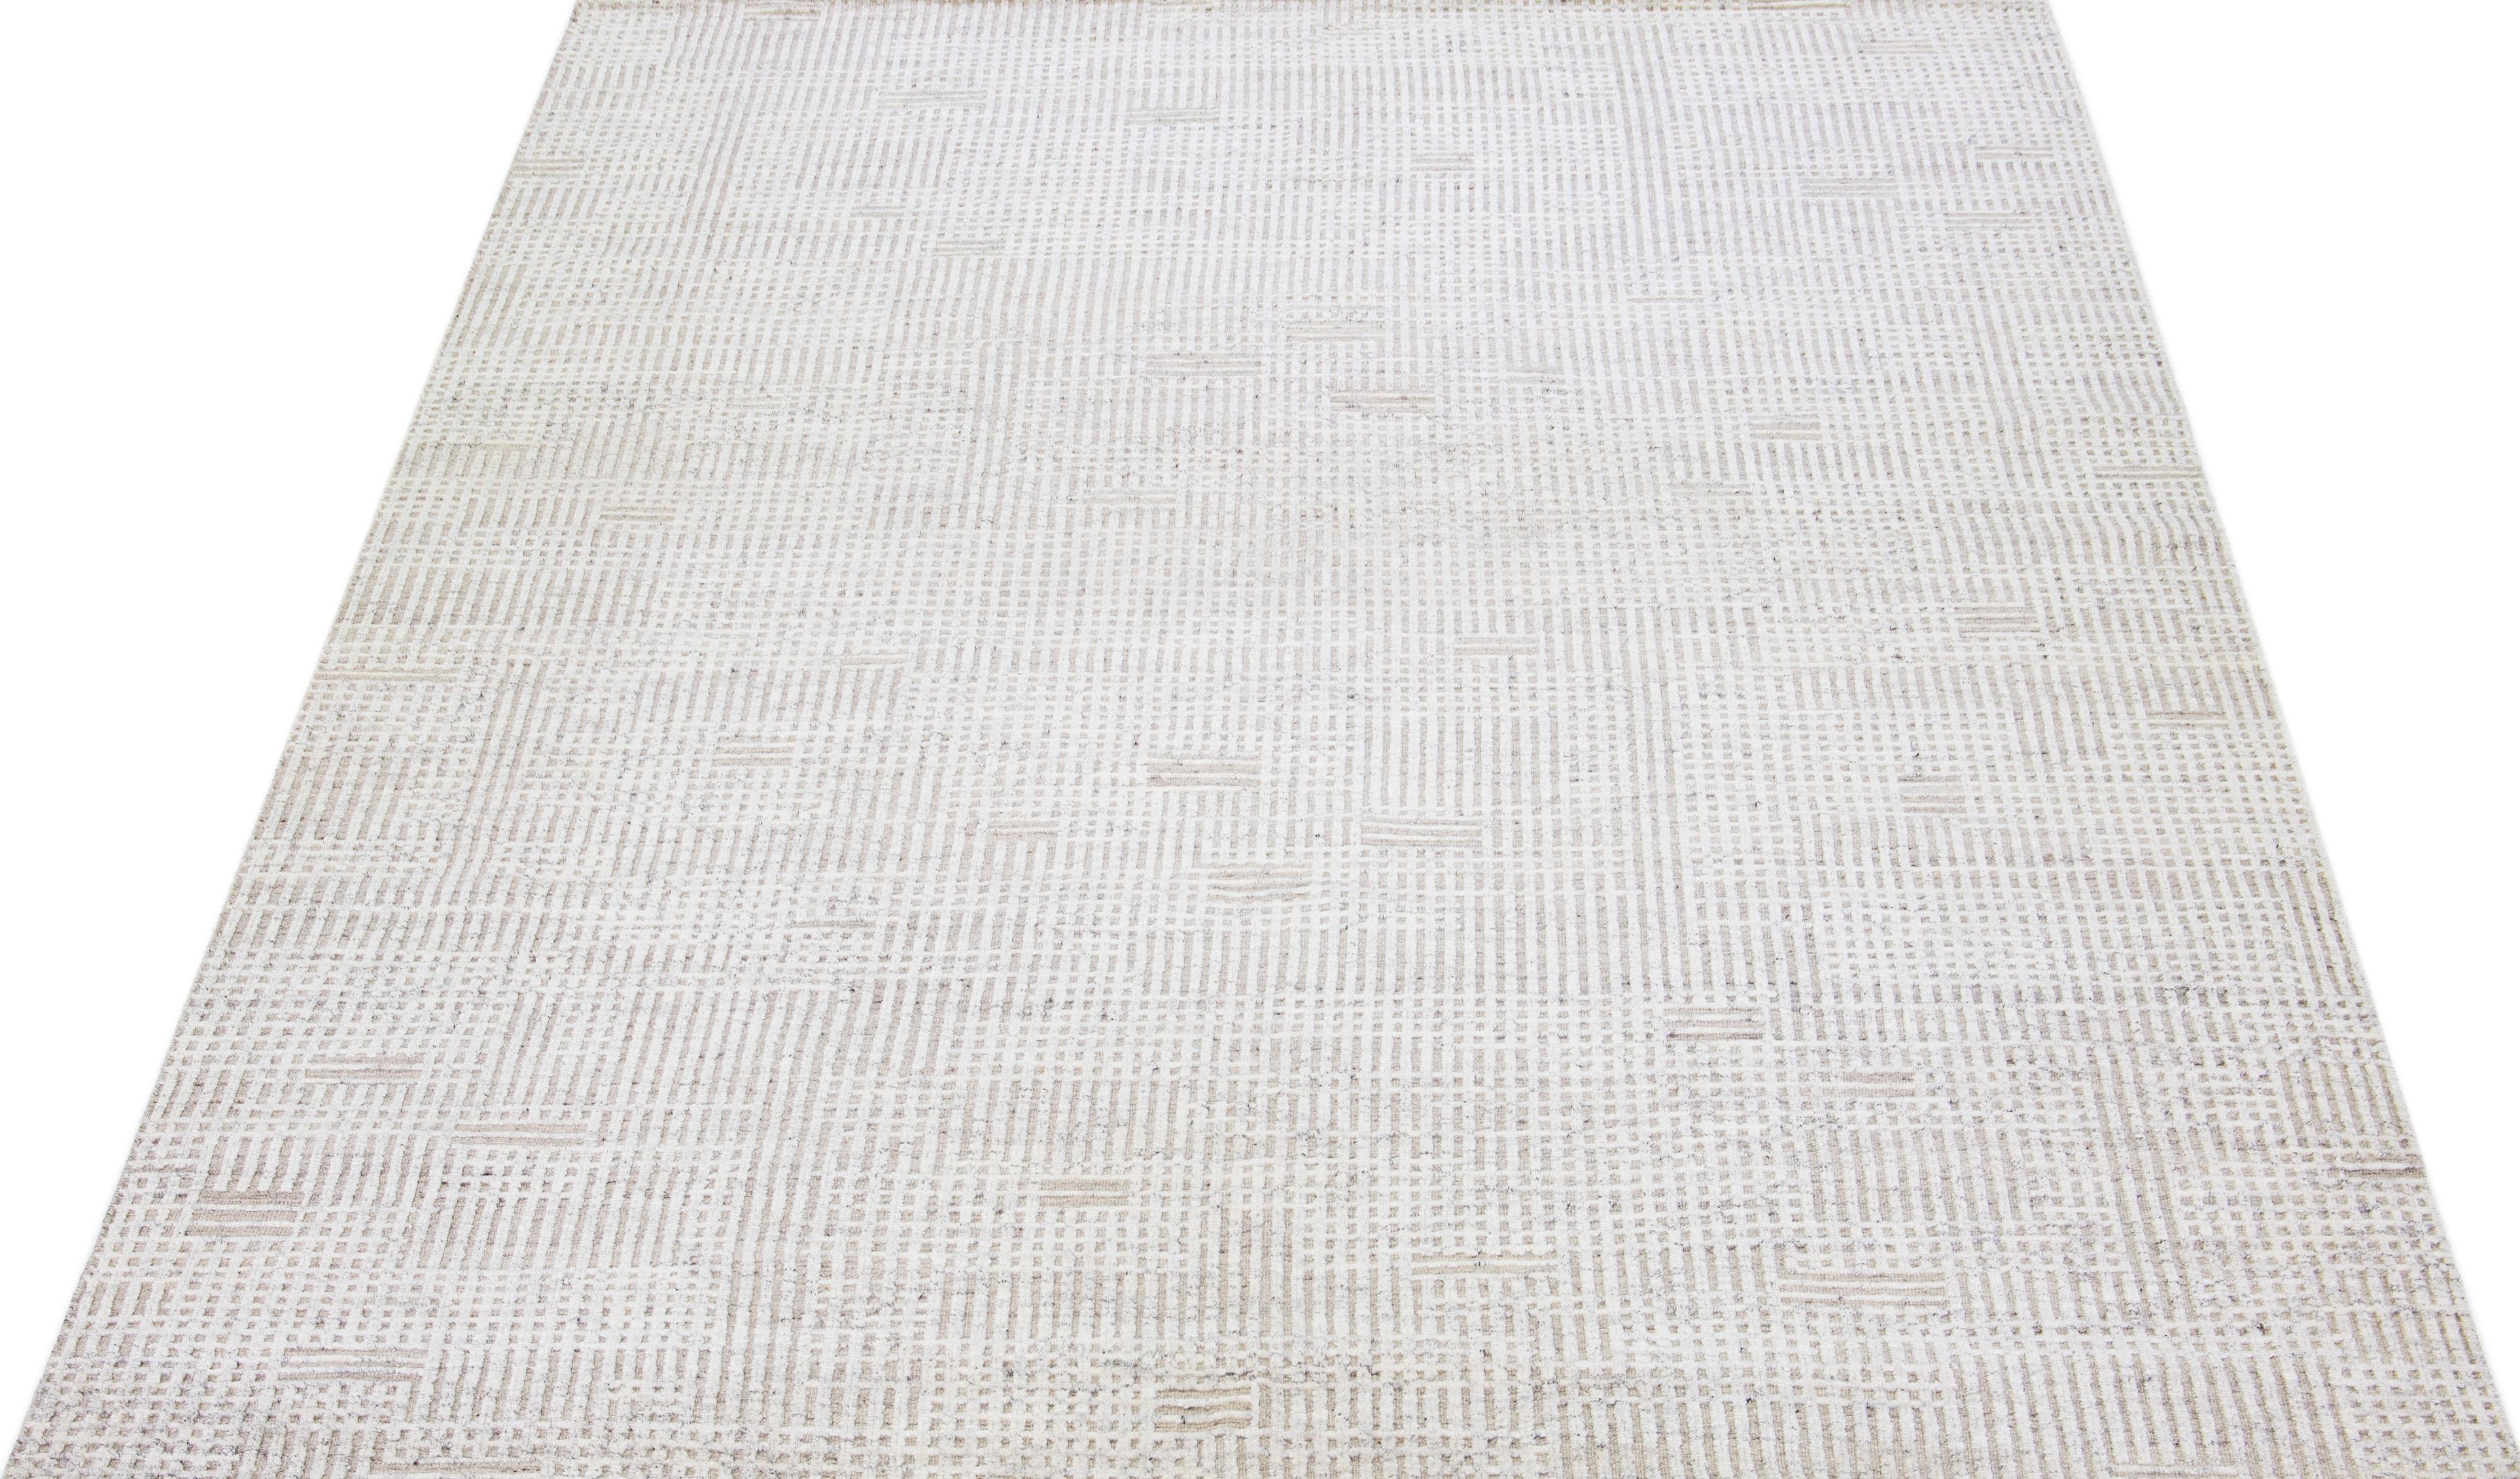 Beautiful modern Moroccan-style hand-knotted wool rug with a beige color field. This rug is part of our Apadana's Safi Collection and features a minimalist design in white and gray.

This rug measures: 10'2